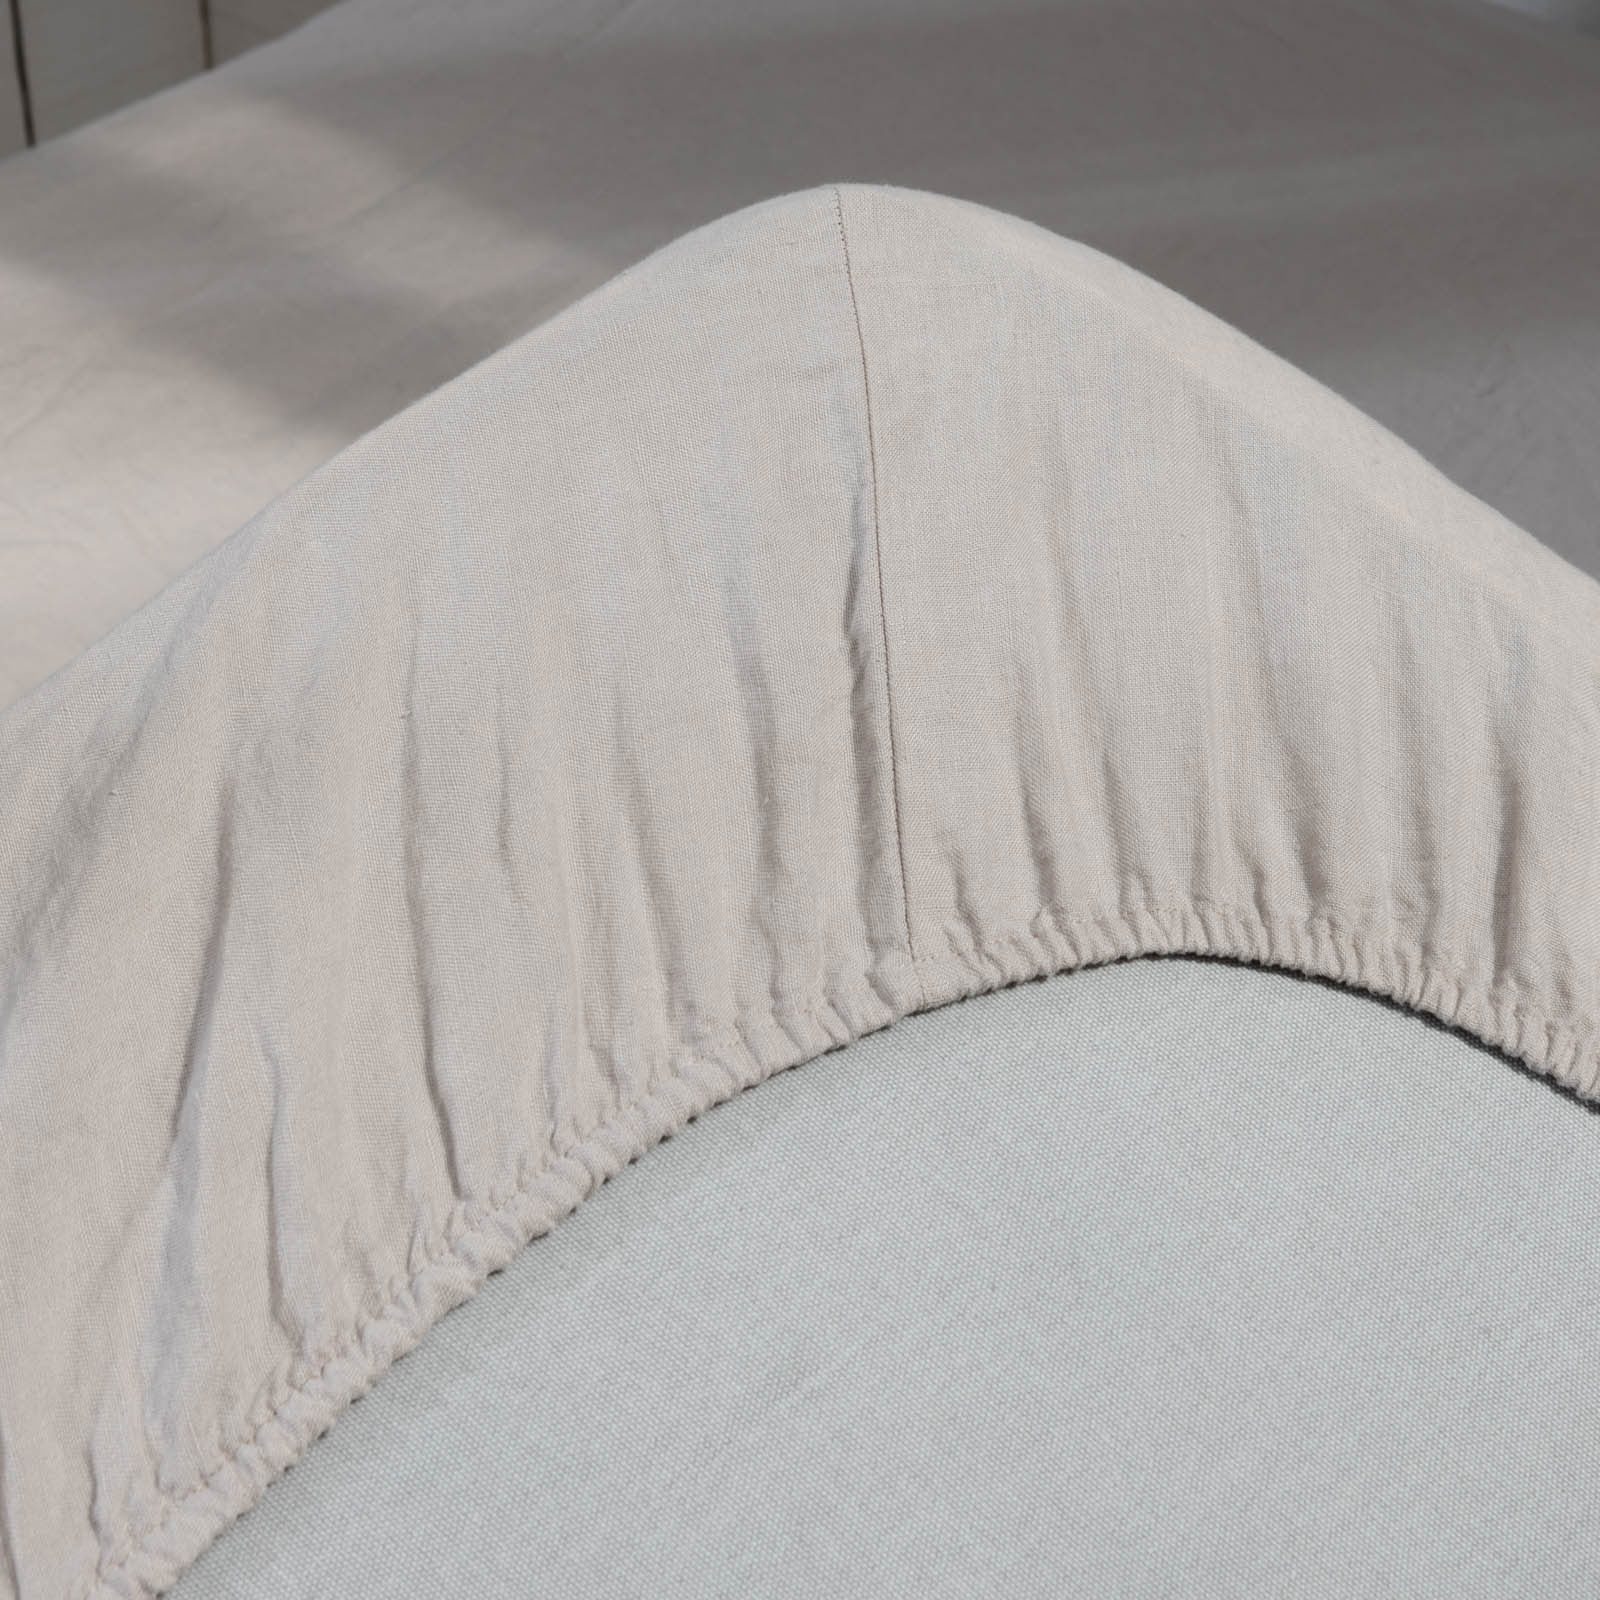 stone-washed-linen-fitted-sheet-natural-2